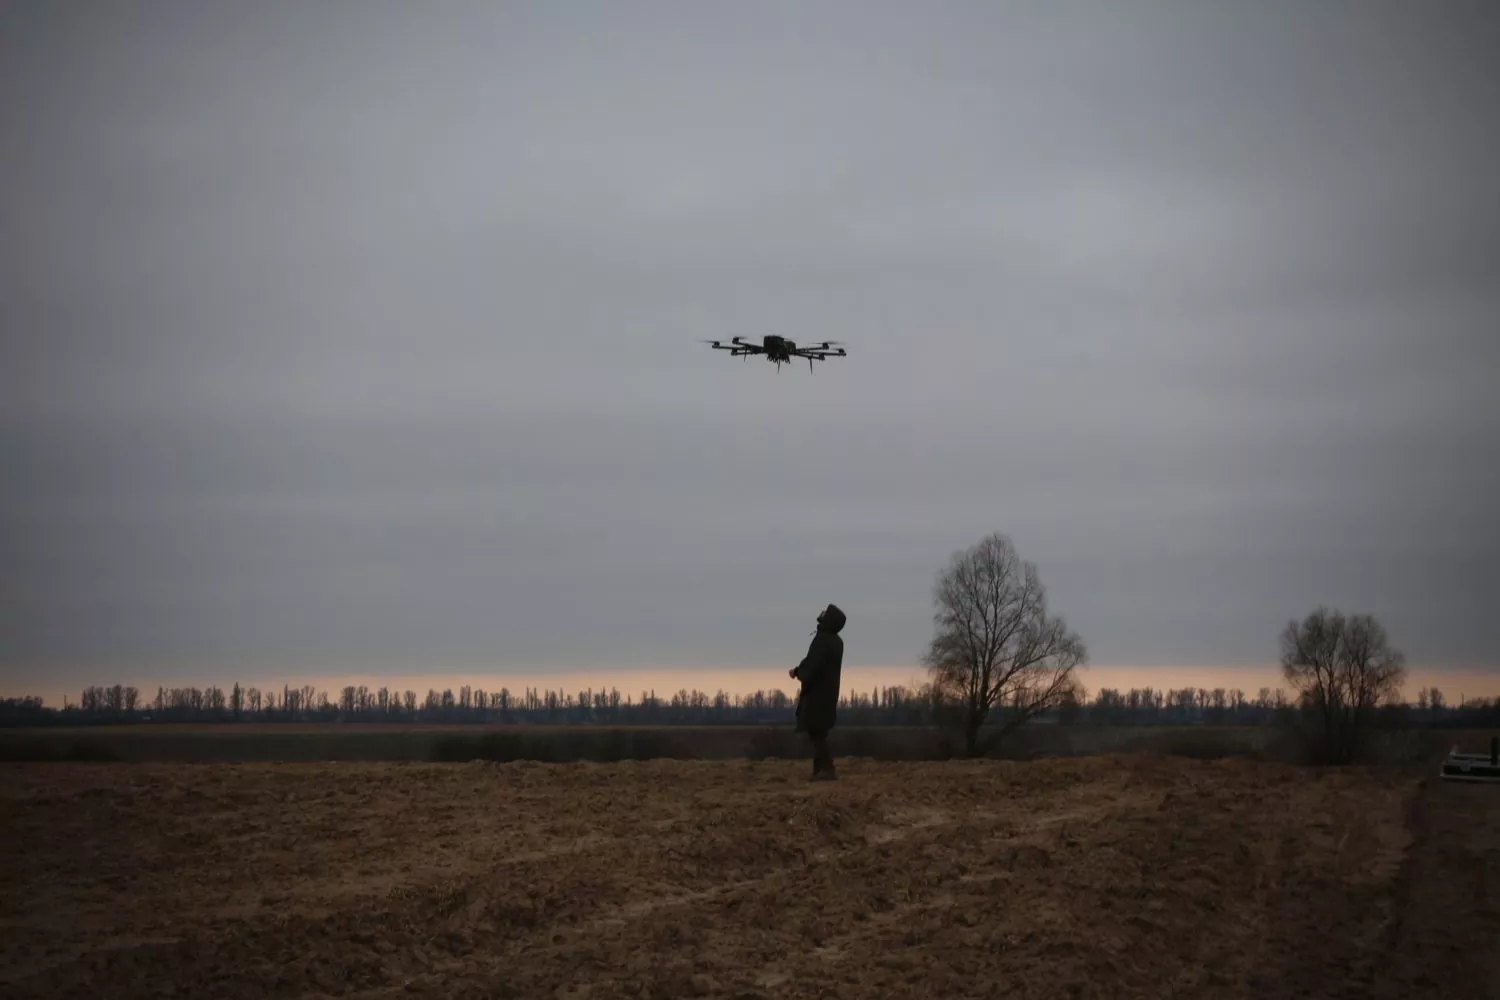 Serhiy Ristenko getting ready to catch an R18 drone. Photo by Euromaidan Press ~